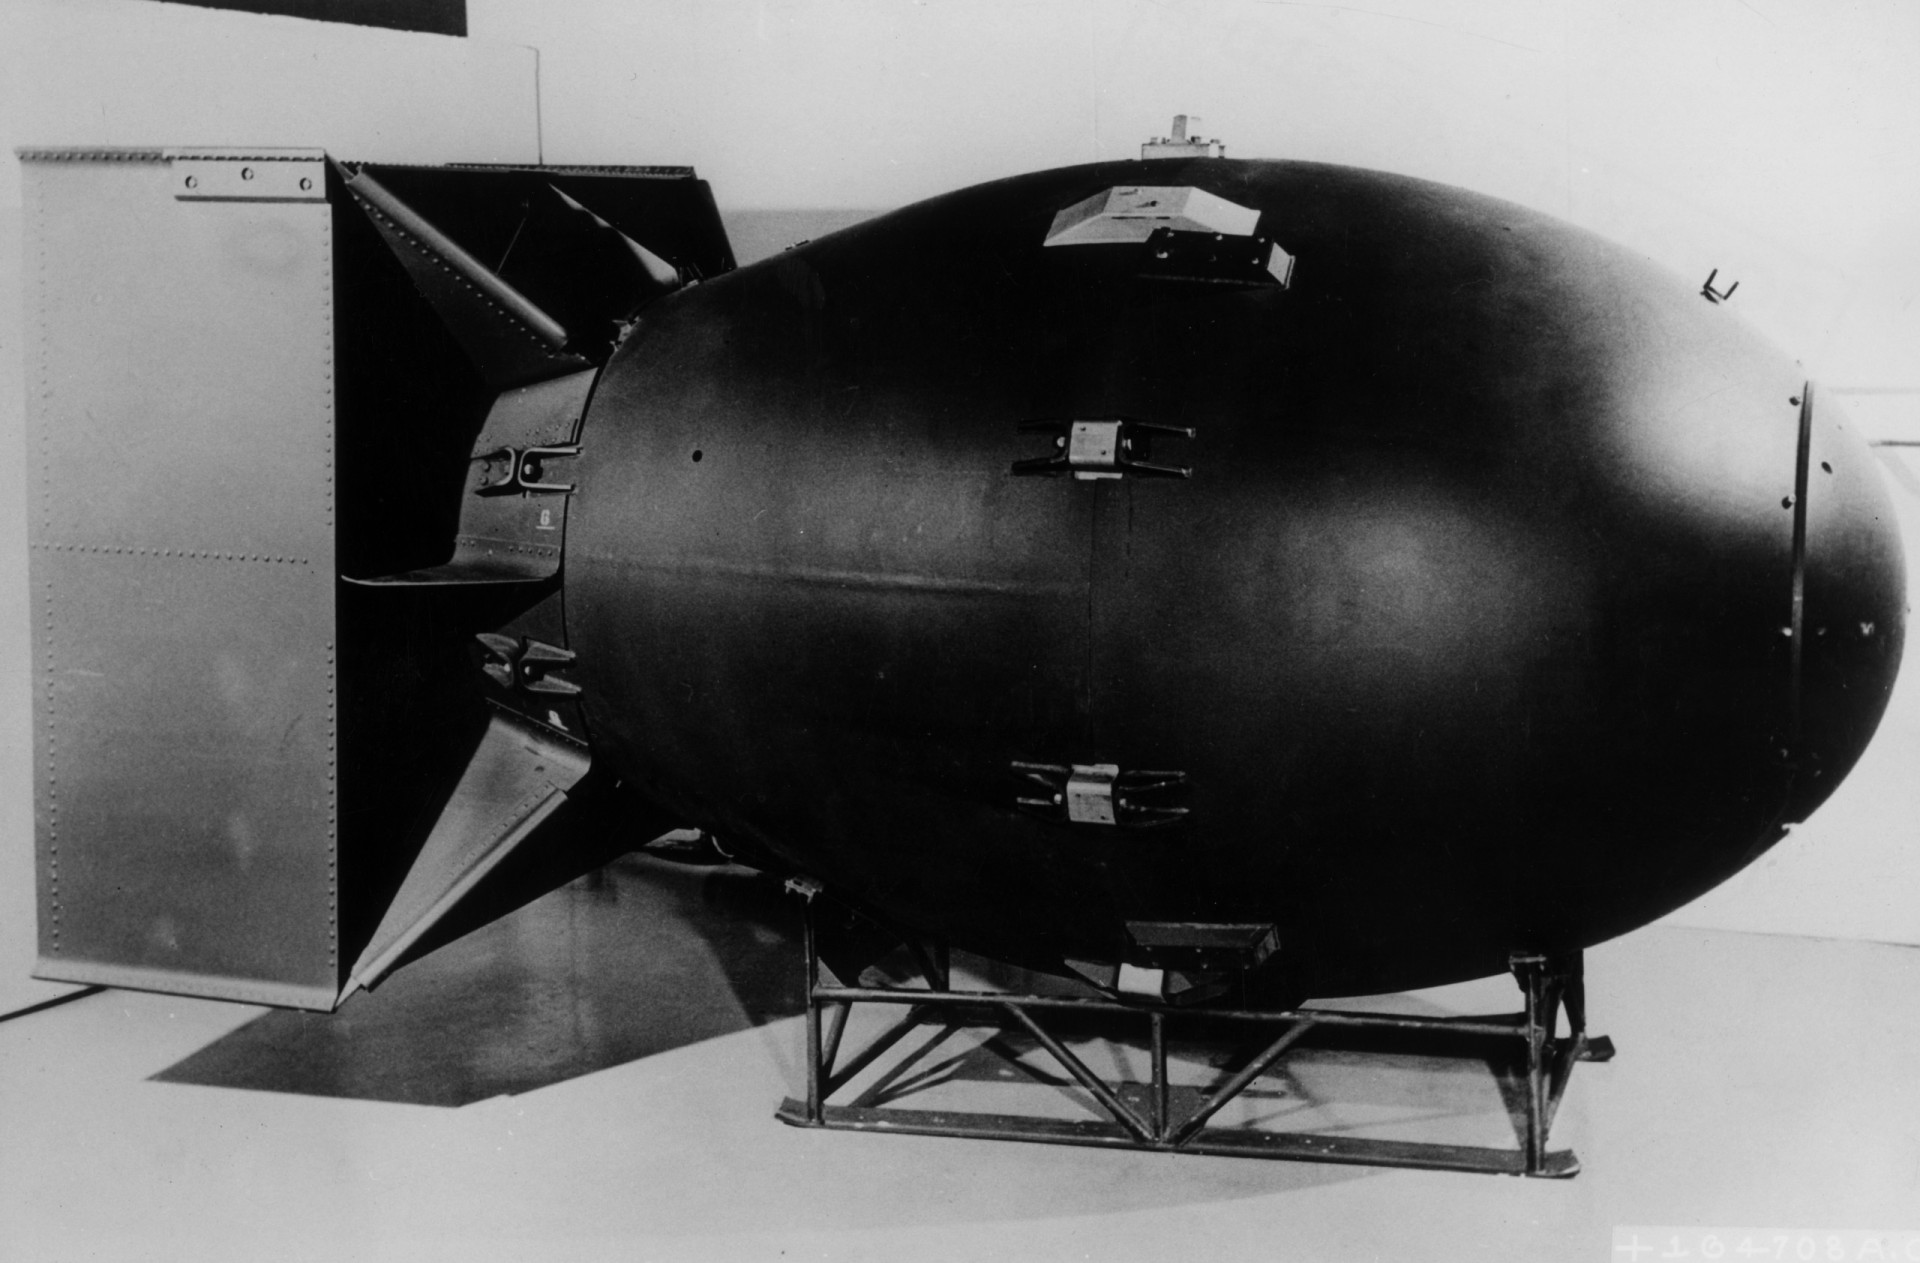 <p>In the end, Reiffel determined that the plan was “technically feasible,” though an atomic bomb would have to be used instead of a hydrogen one.</p><p><a href="https://www.msn.com/en-ph/community/channel/vid-7xx8mnucu55yw63we9va2gwr7uihbxwc68fxqp25x6tg4ftibpra?cvid=94631541bc0f4f89bfd59158d696ad7e">Follow us and access great exclusive content every day</a></p>